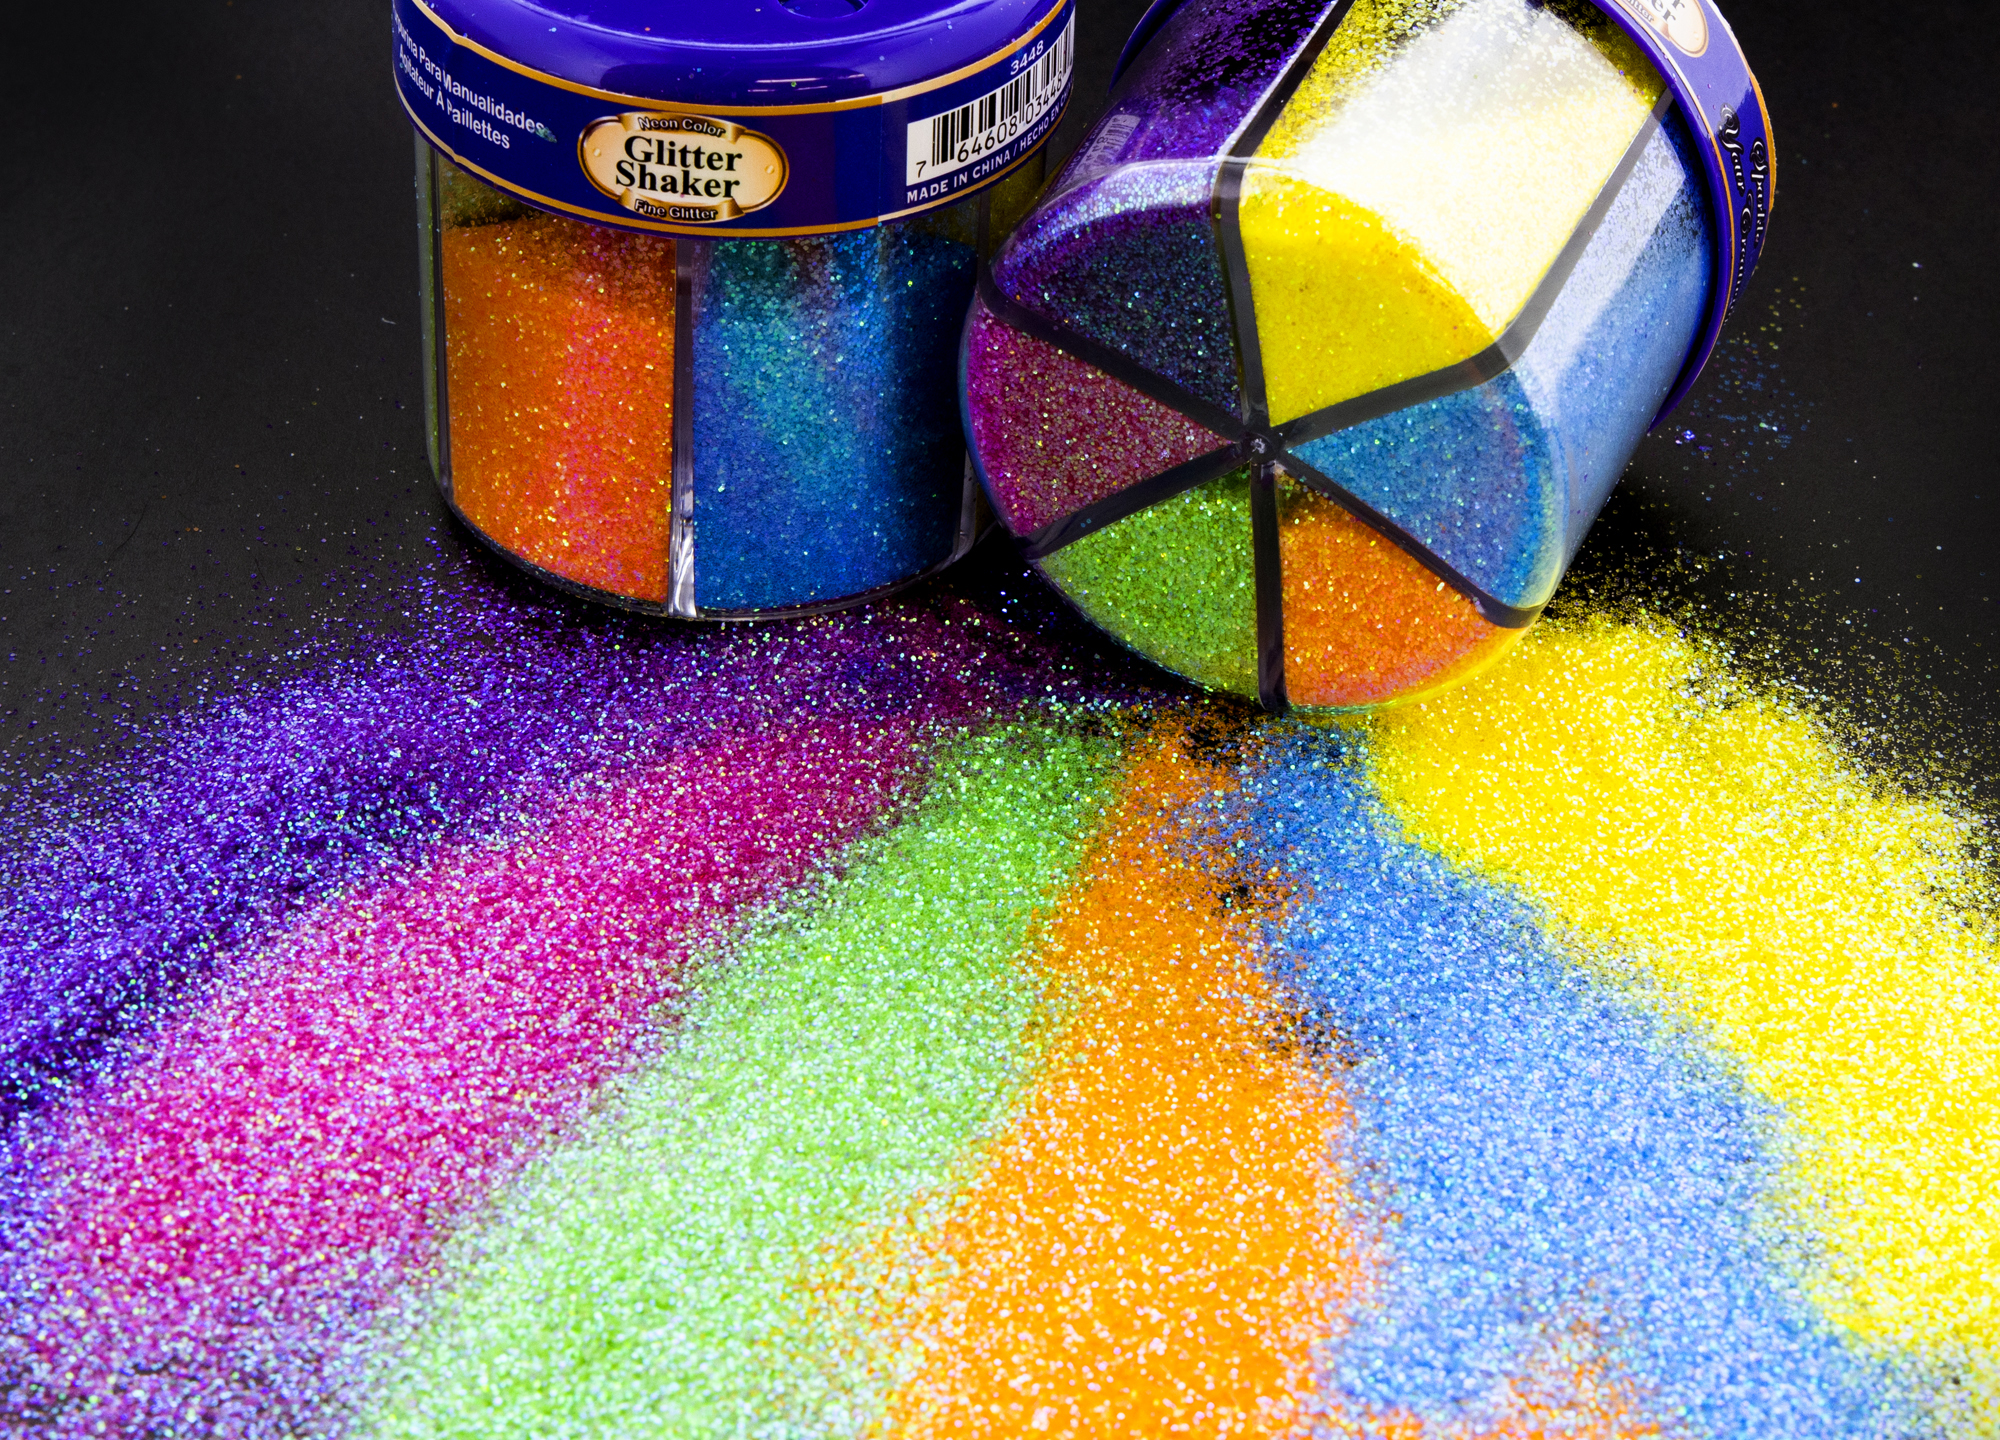 Bomega Primary Neon Glitter Fabric Paint Fabric Color 12colors Paint On The  Clothes - Buy Bomega Primary Neon Glitter Fabric Paint Fabric Color  12colors Paint On The Clothes Product on